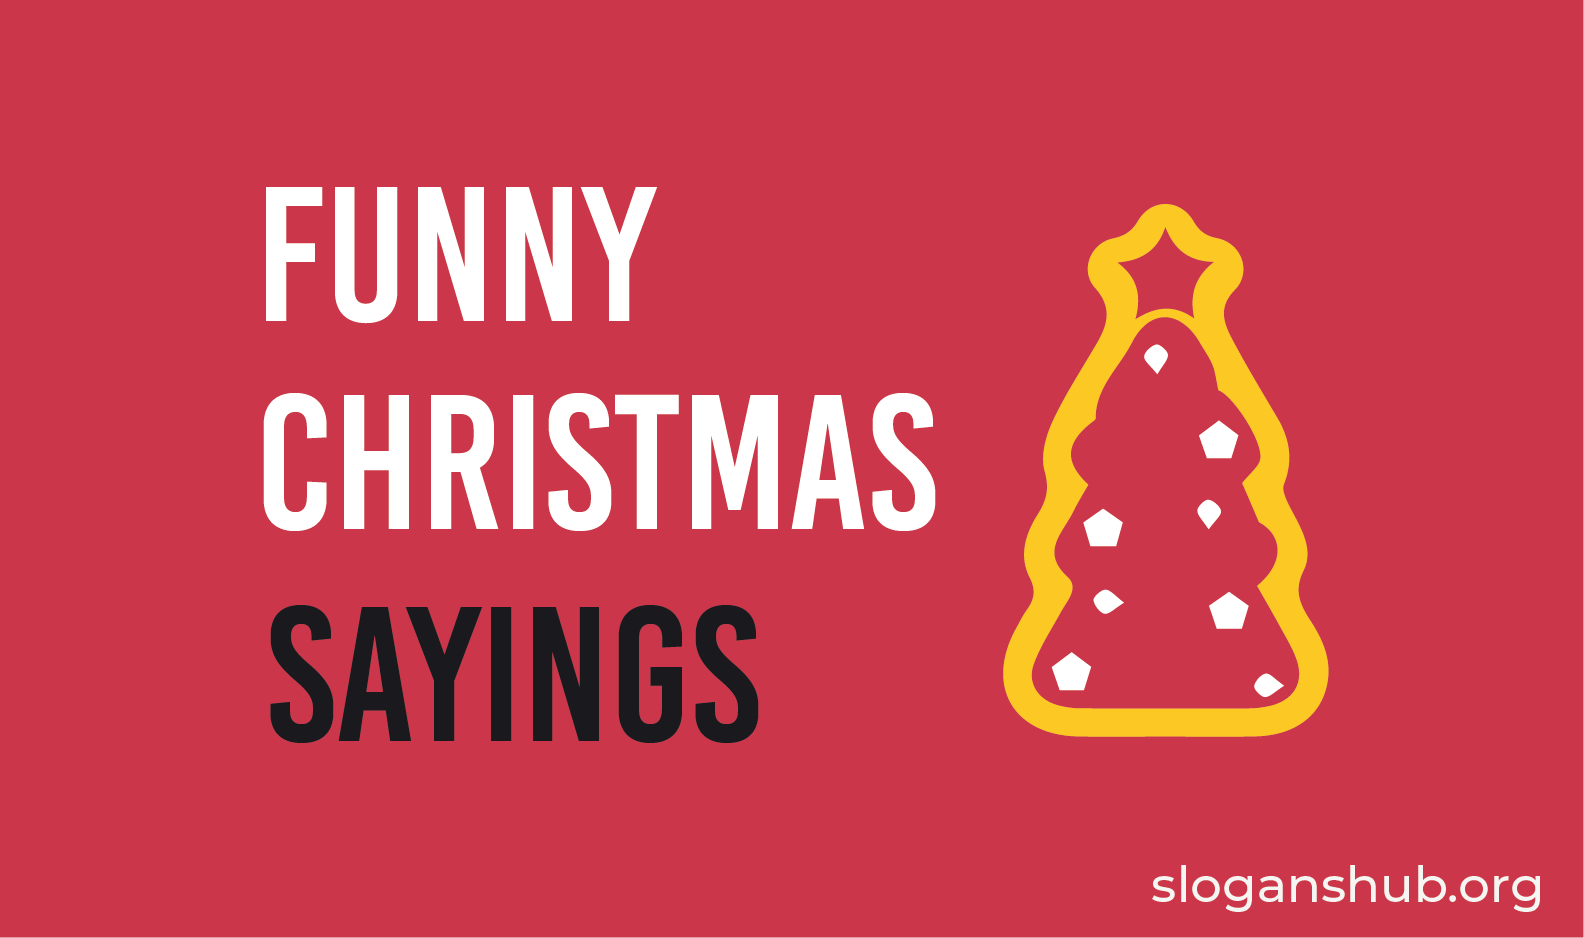 250 Funny Christmas Quotes for Cards, Friends, Tree, Vacation, Shopping